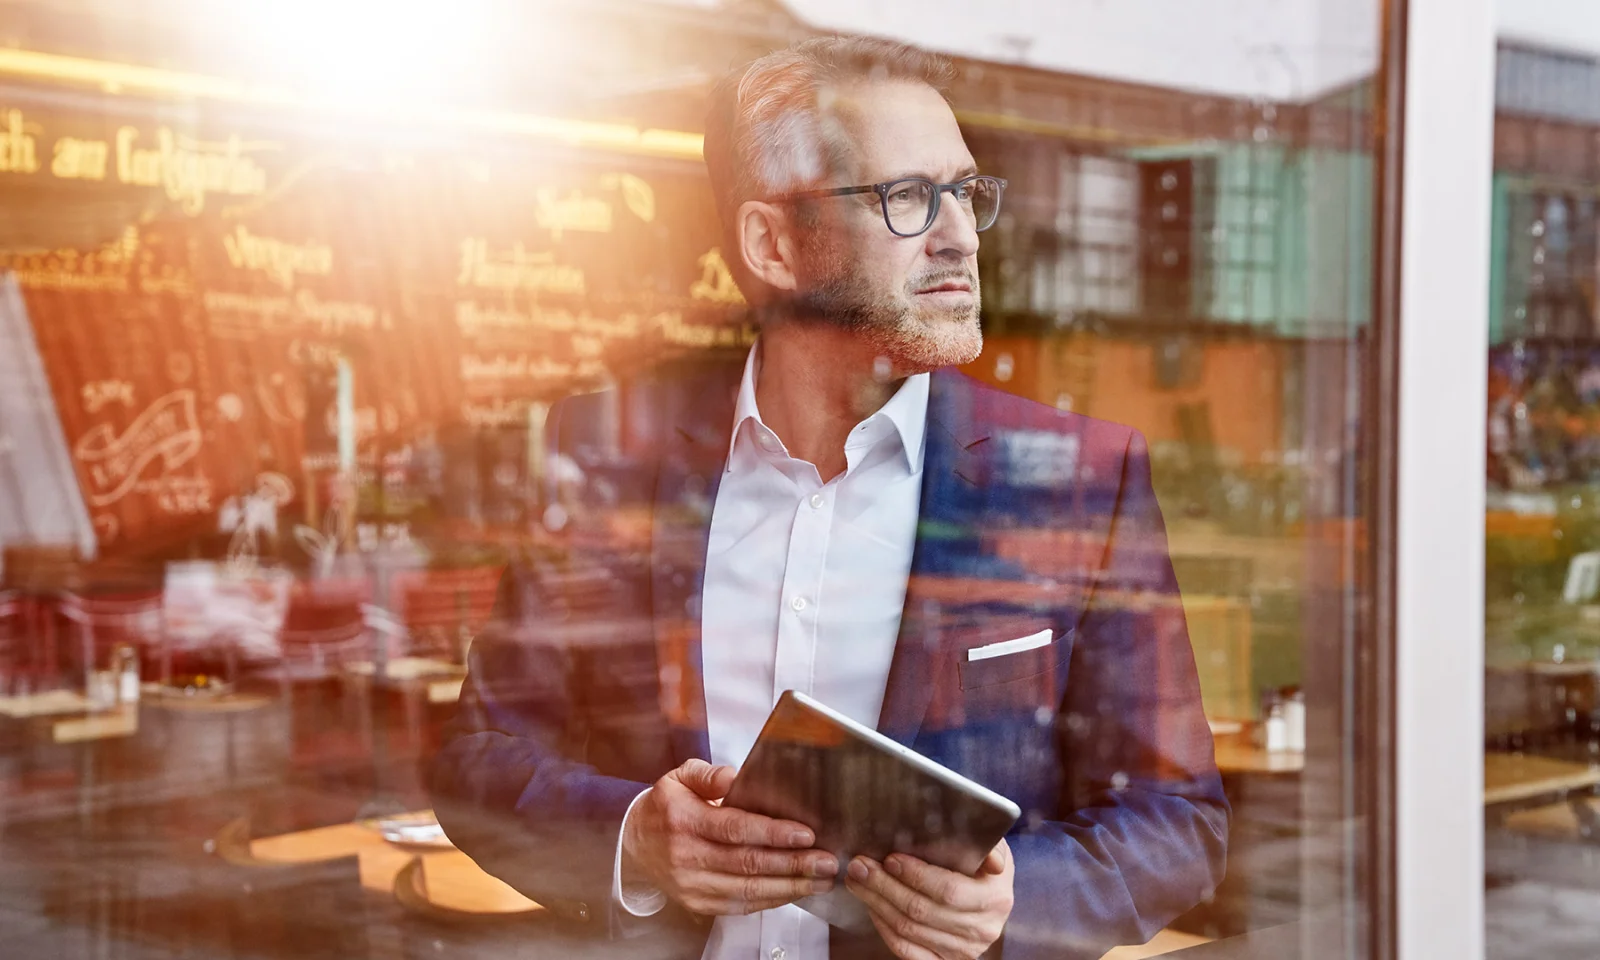 Business professional holding a tablet, gazing thoughtfully through a cafe window. This image captures GFT&#039;s dedication to digital transformation and strategic innovation, showcasing how technology drives business success in modern environments.